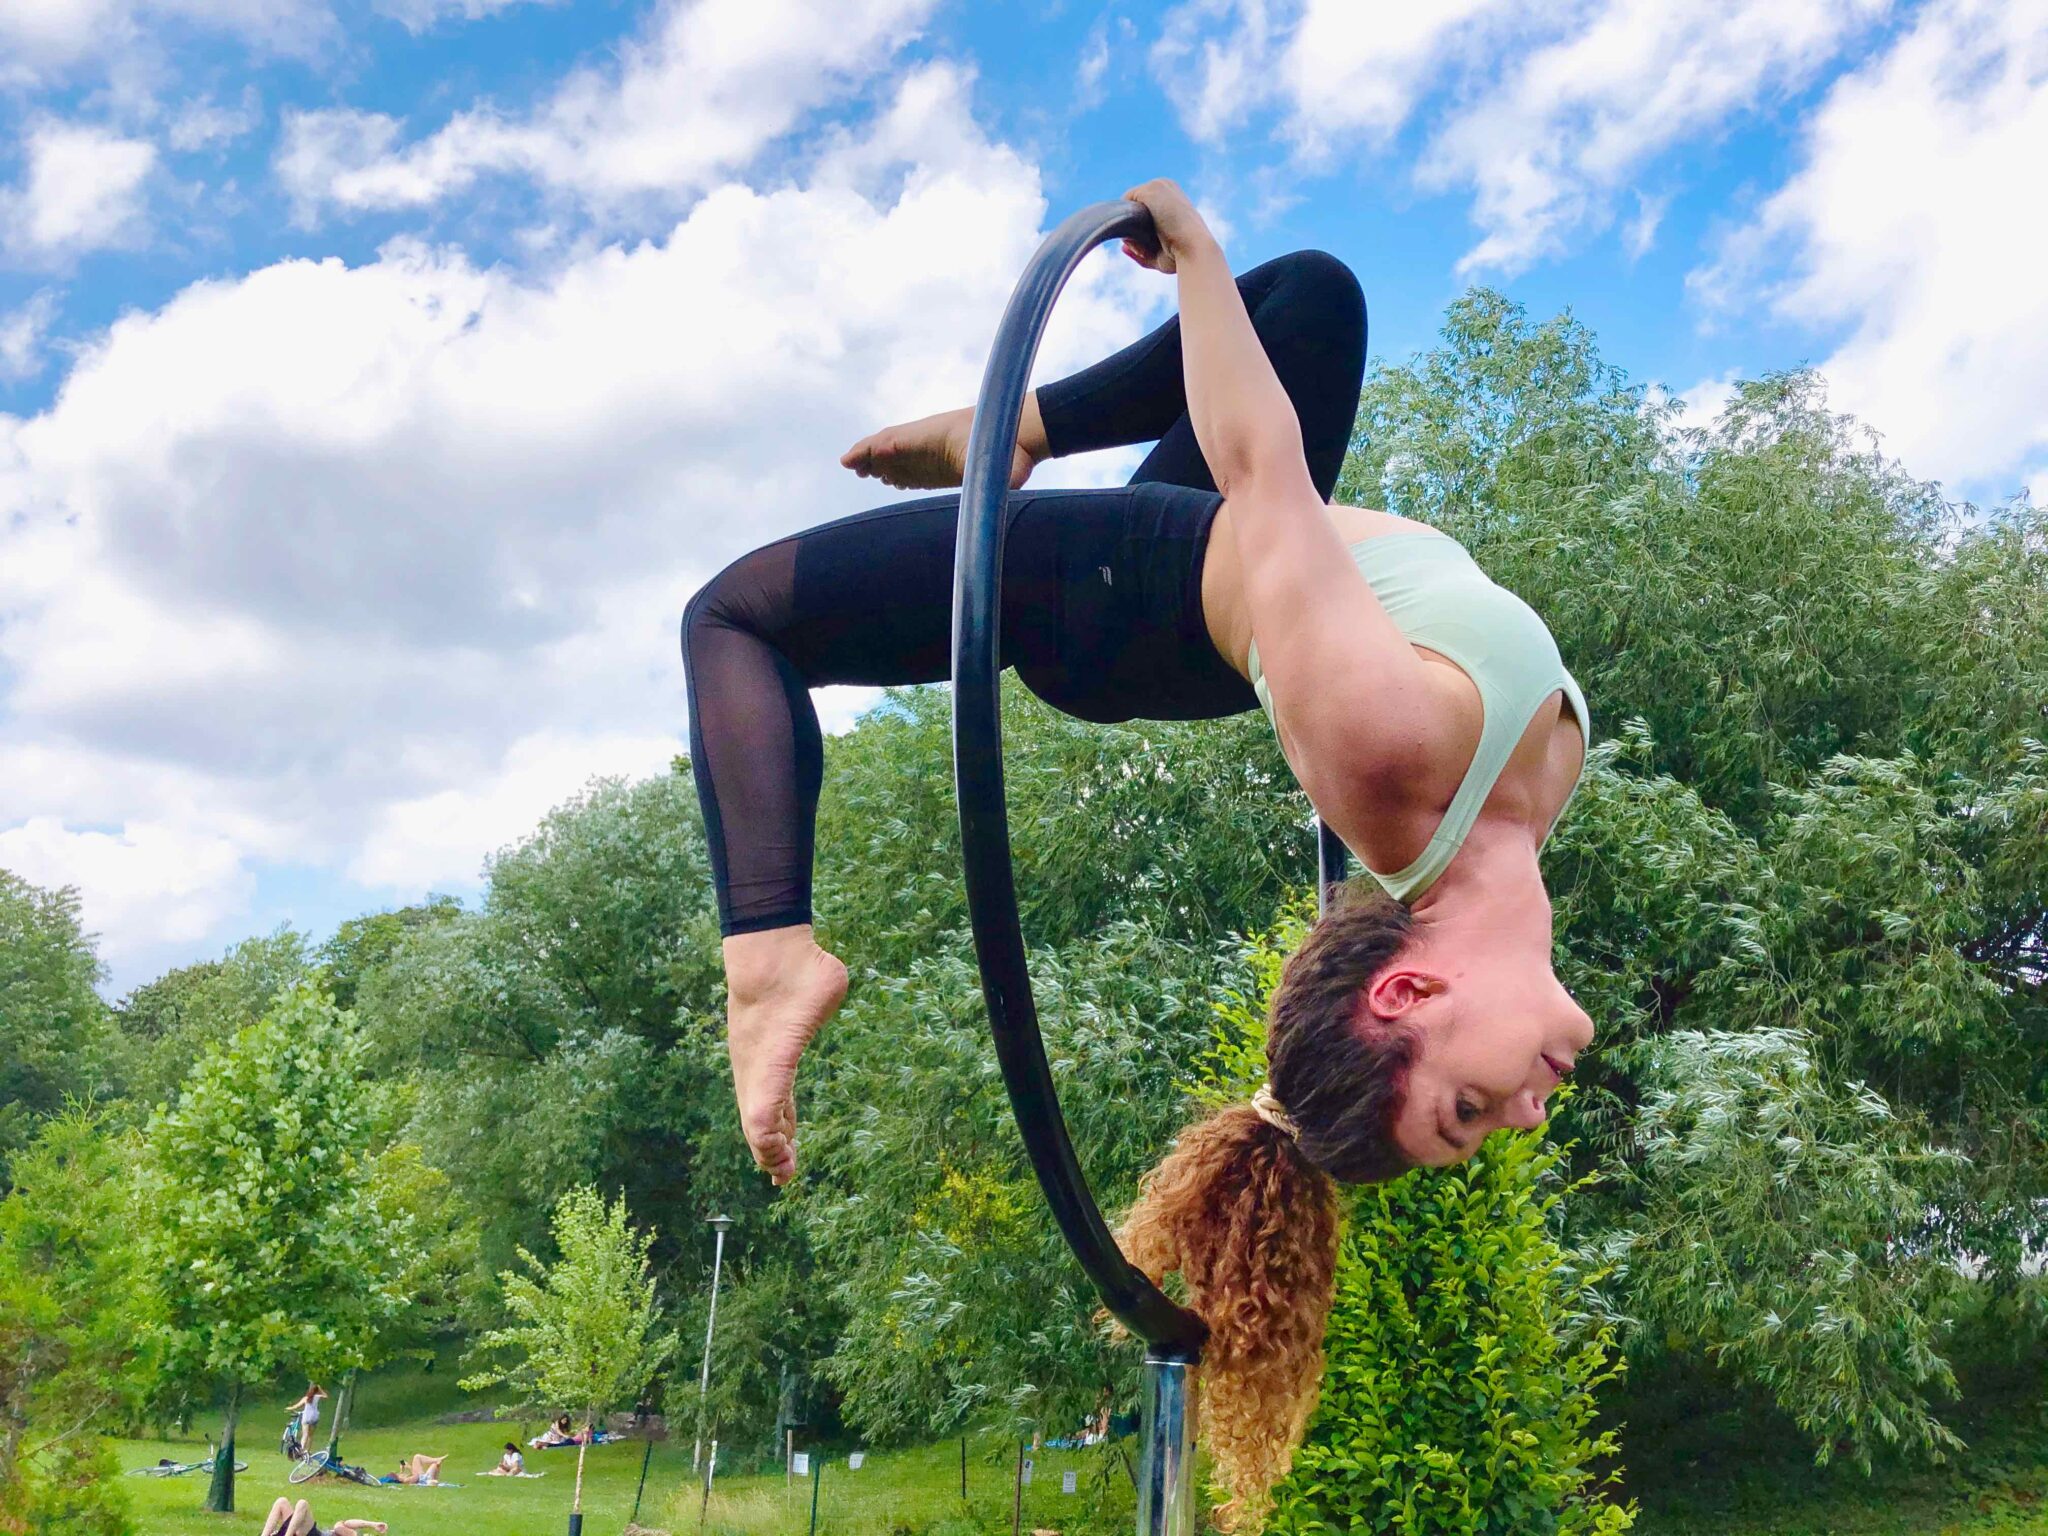 Cassandra wearing the V Shred Seamless Flex Sports Bra during an outdoor aerial hoop training session